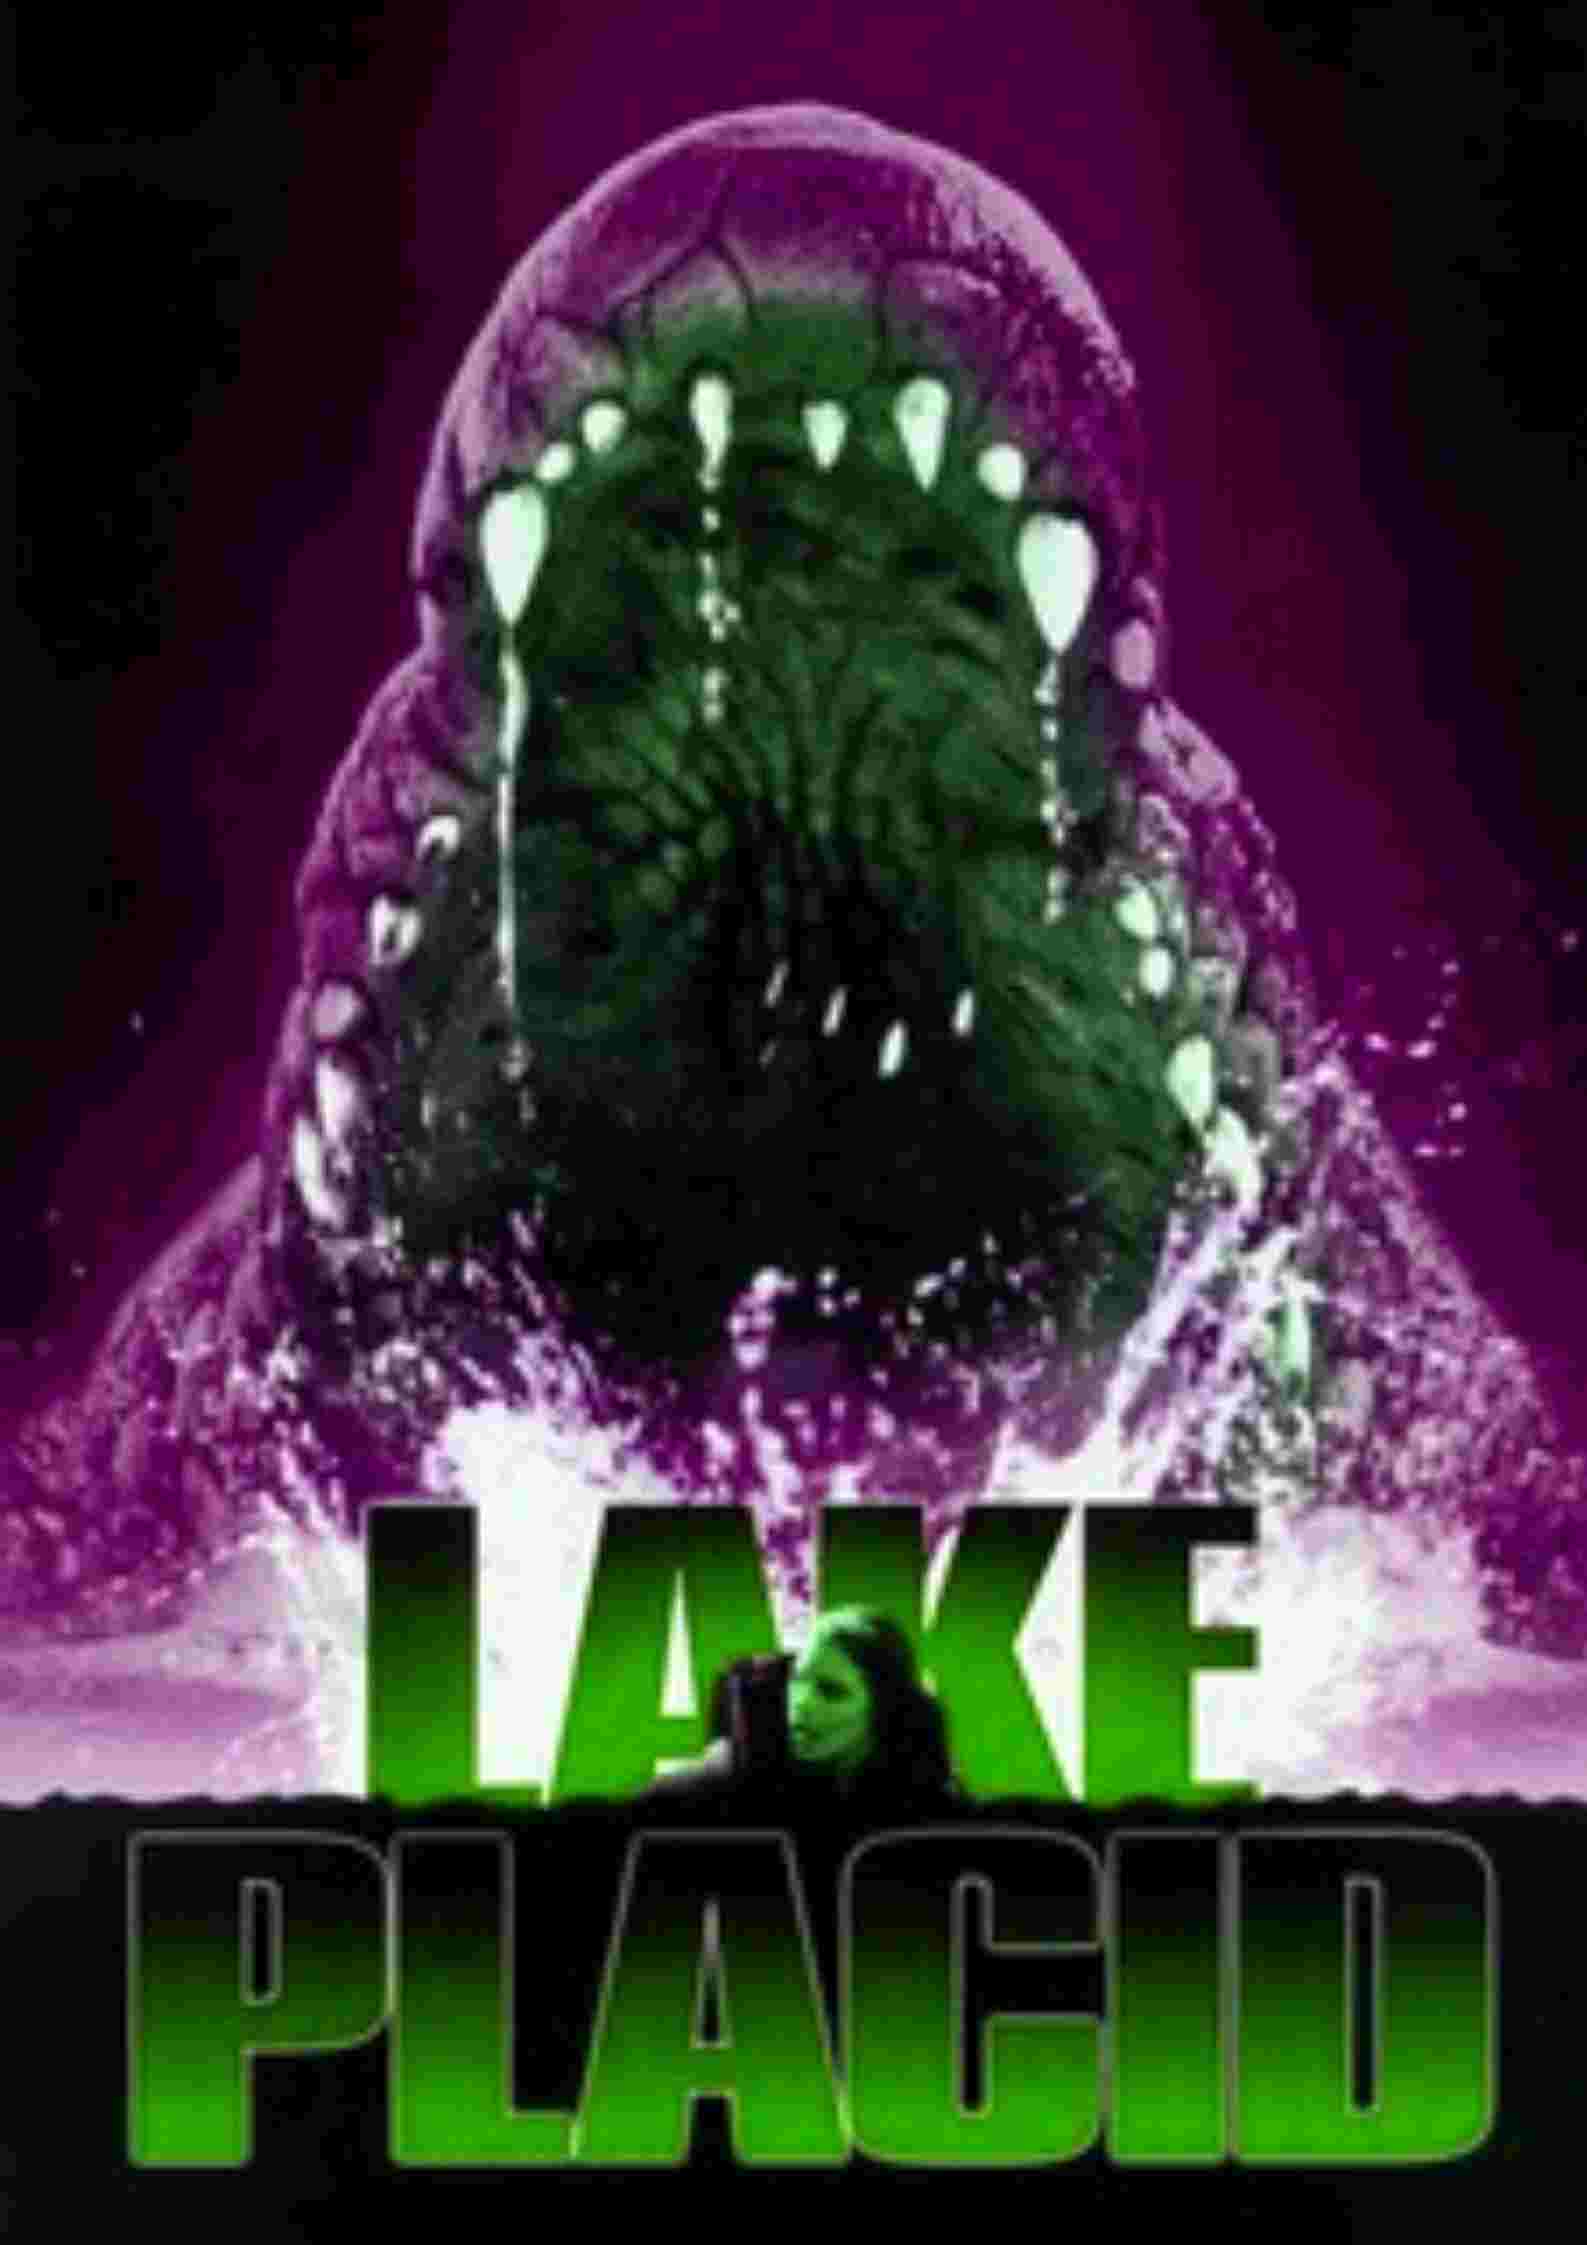 Lake Placid Parents Guide and age rating | 1999 film